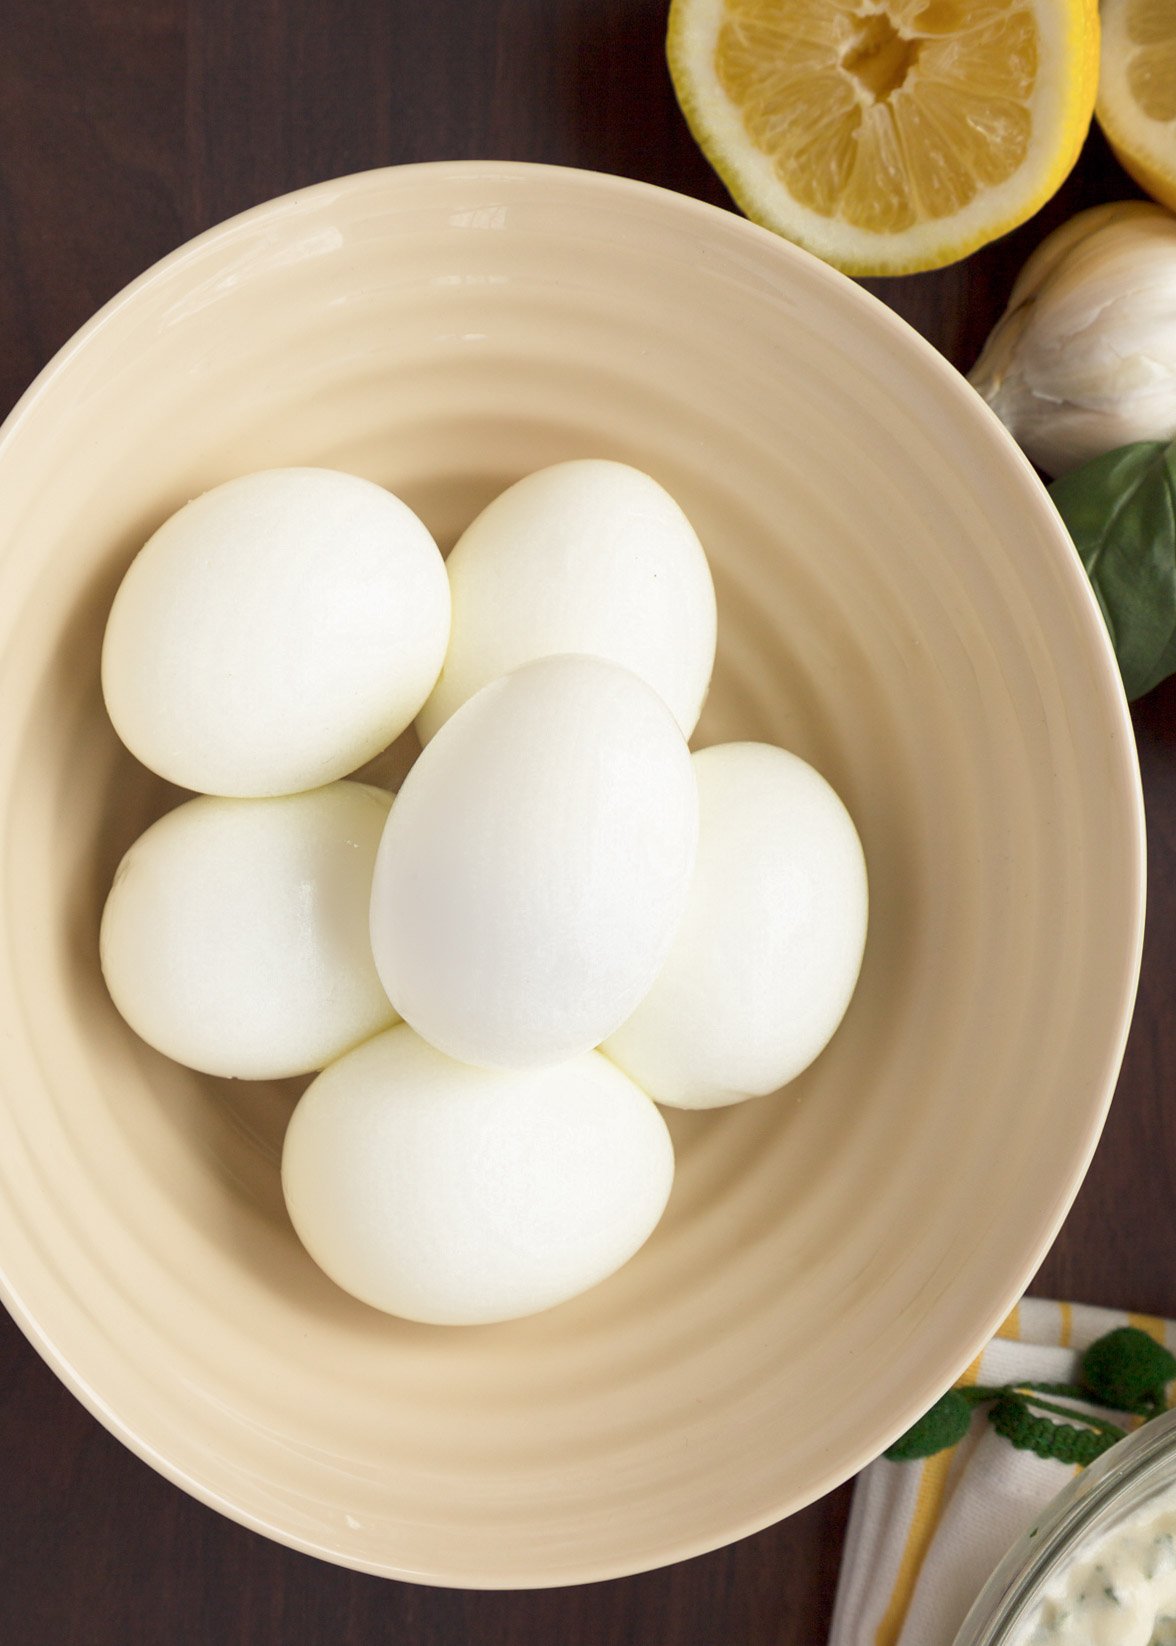 six hard boiled eggs in an ivory ceramic bowl (overhead)